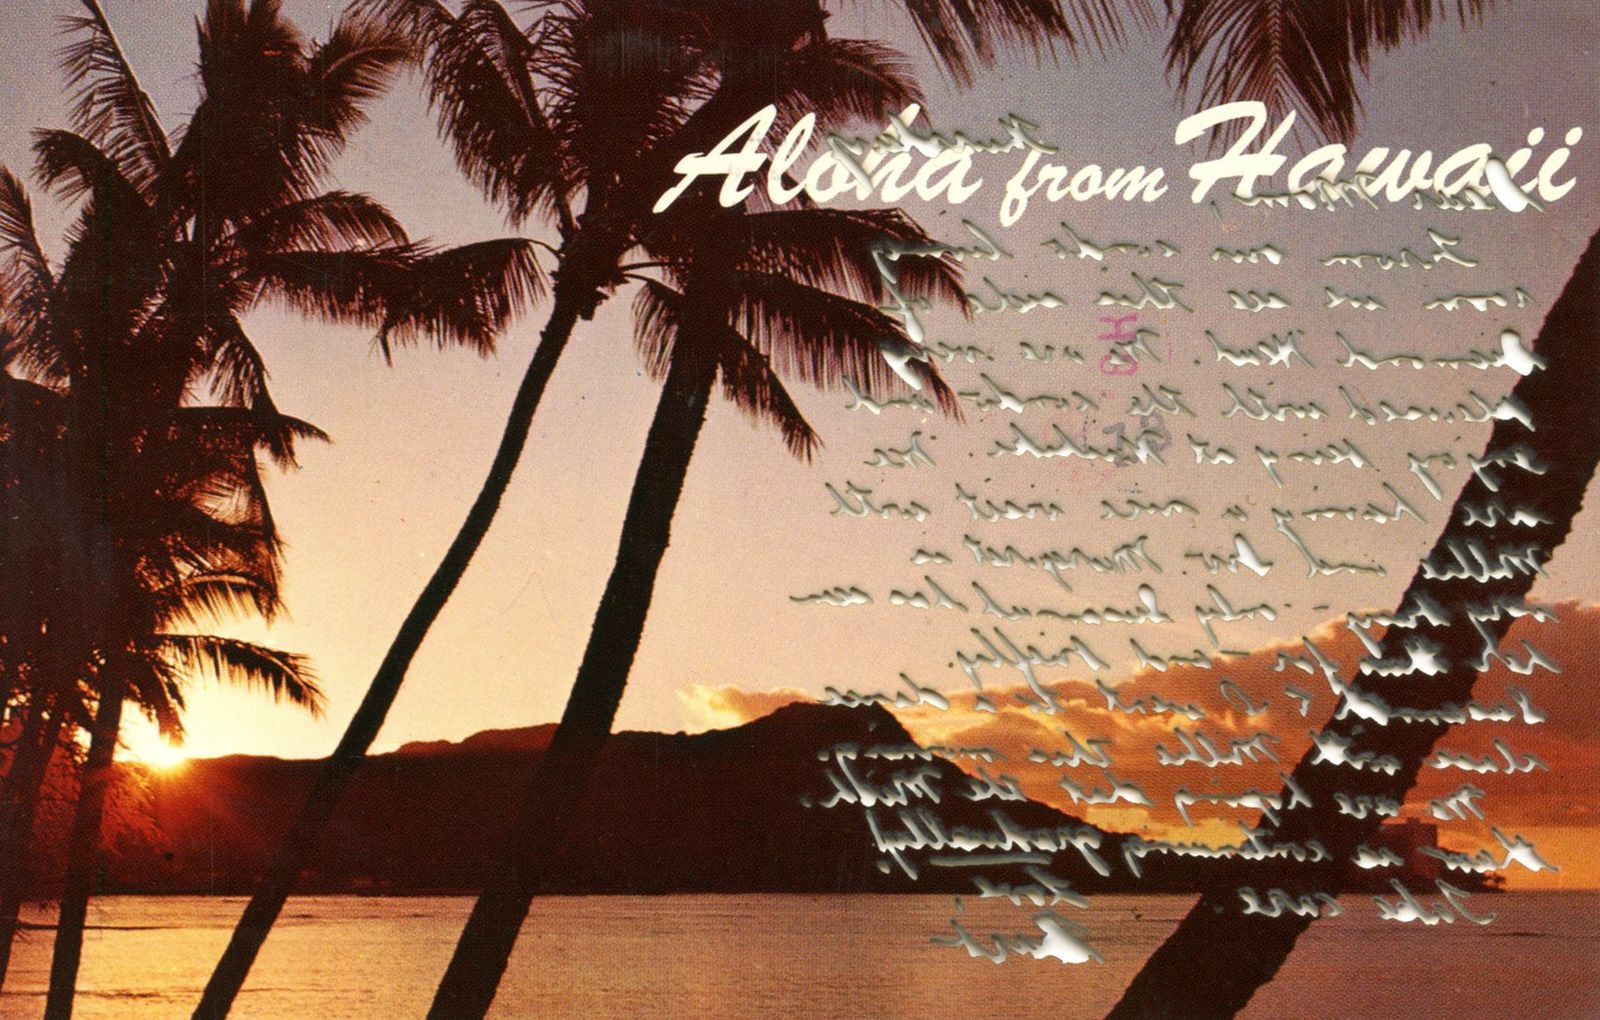 © Leah Schretenthaler - Image from the Aloha From Hawaii photography project